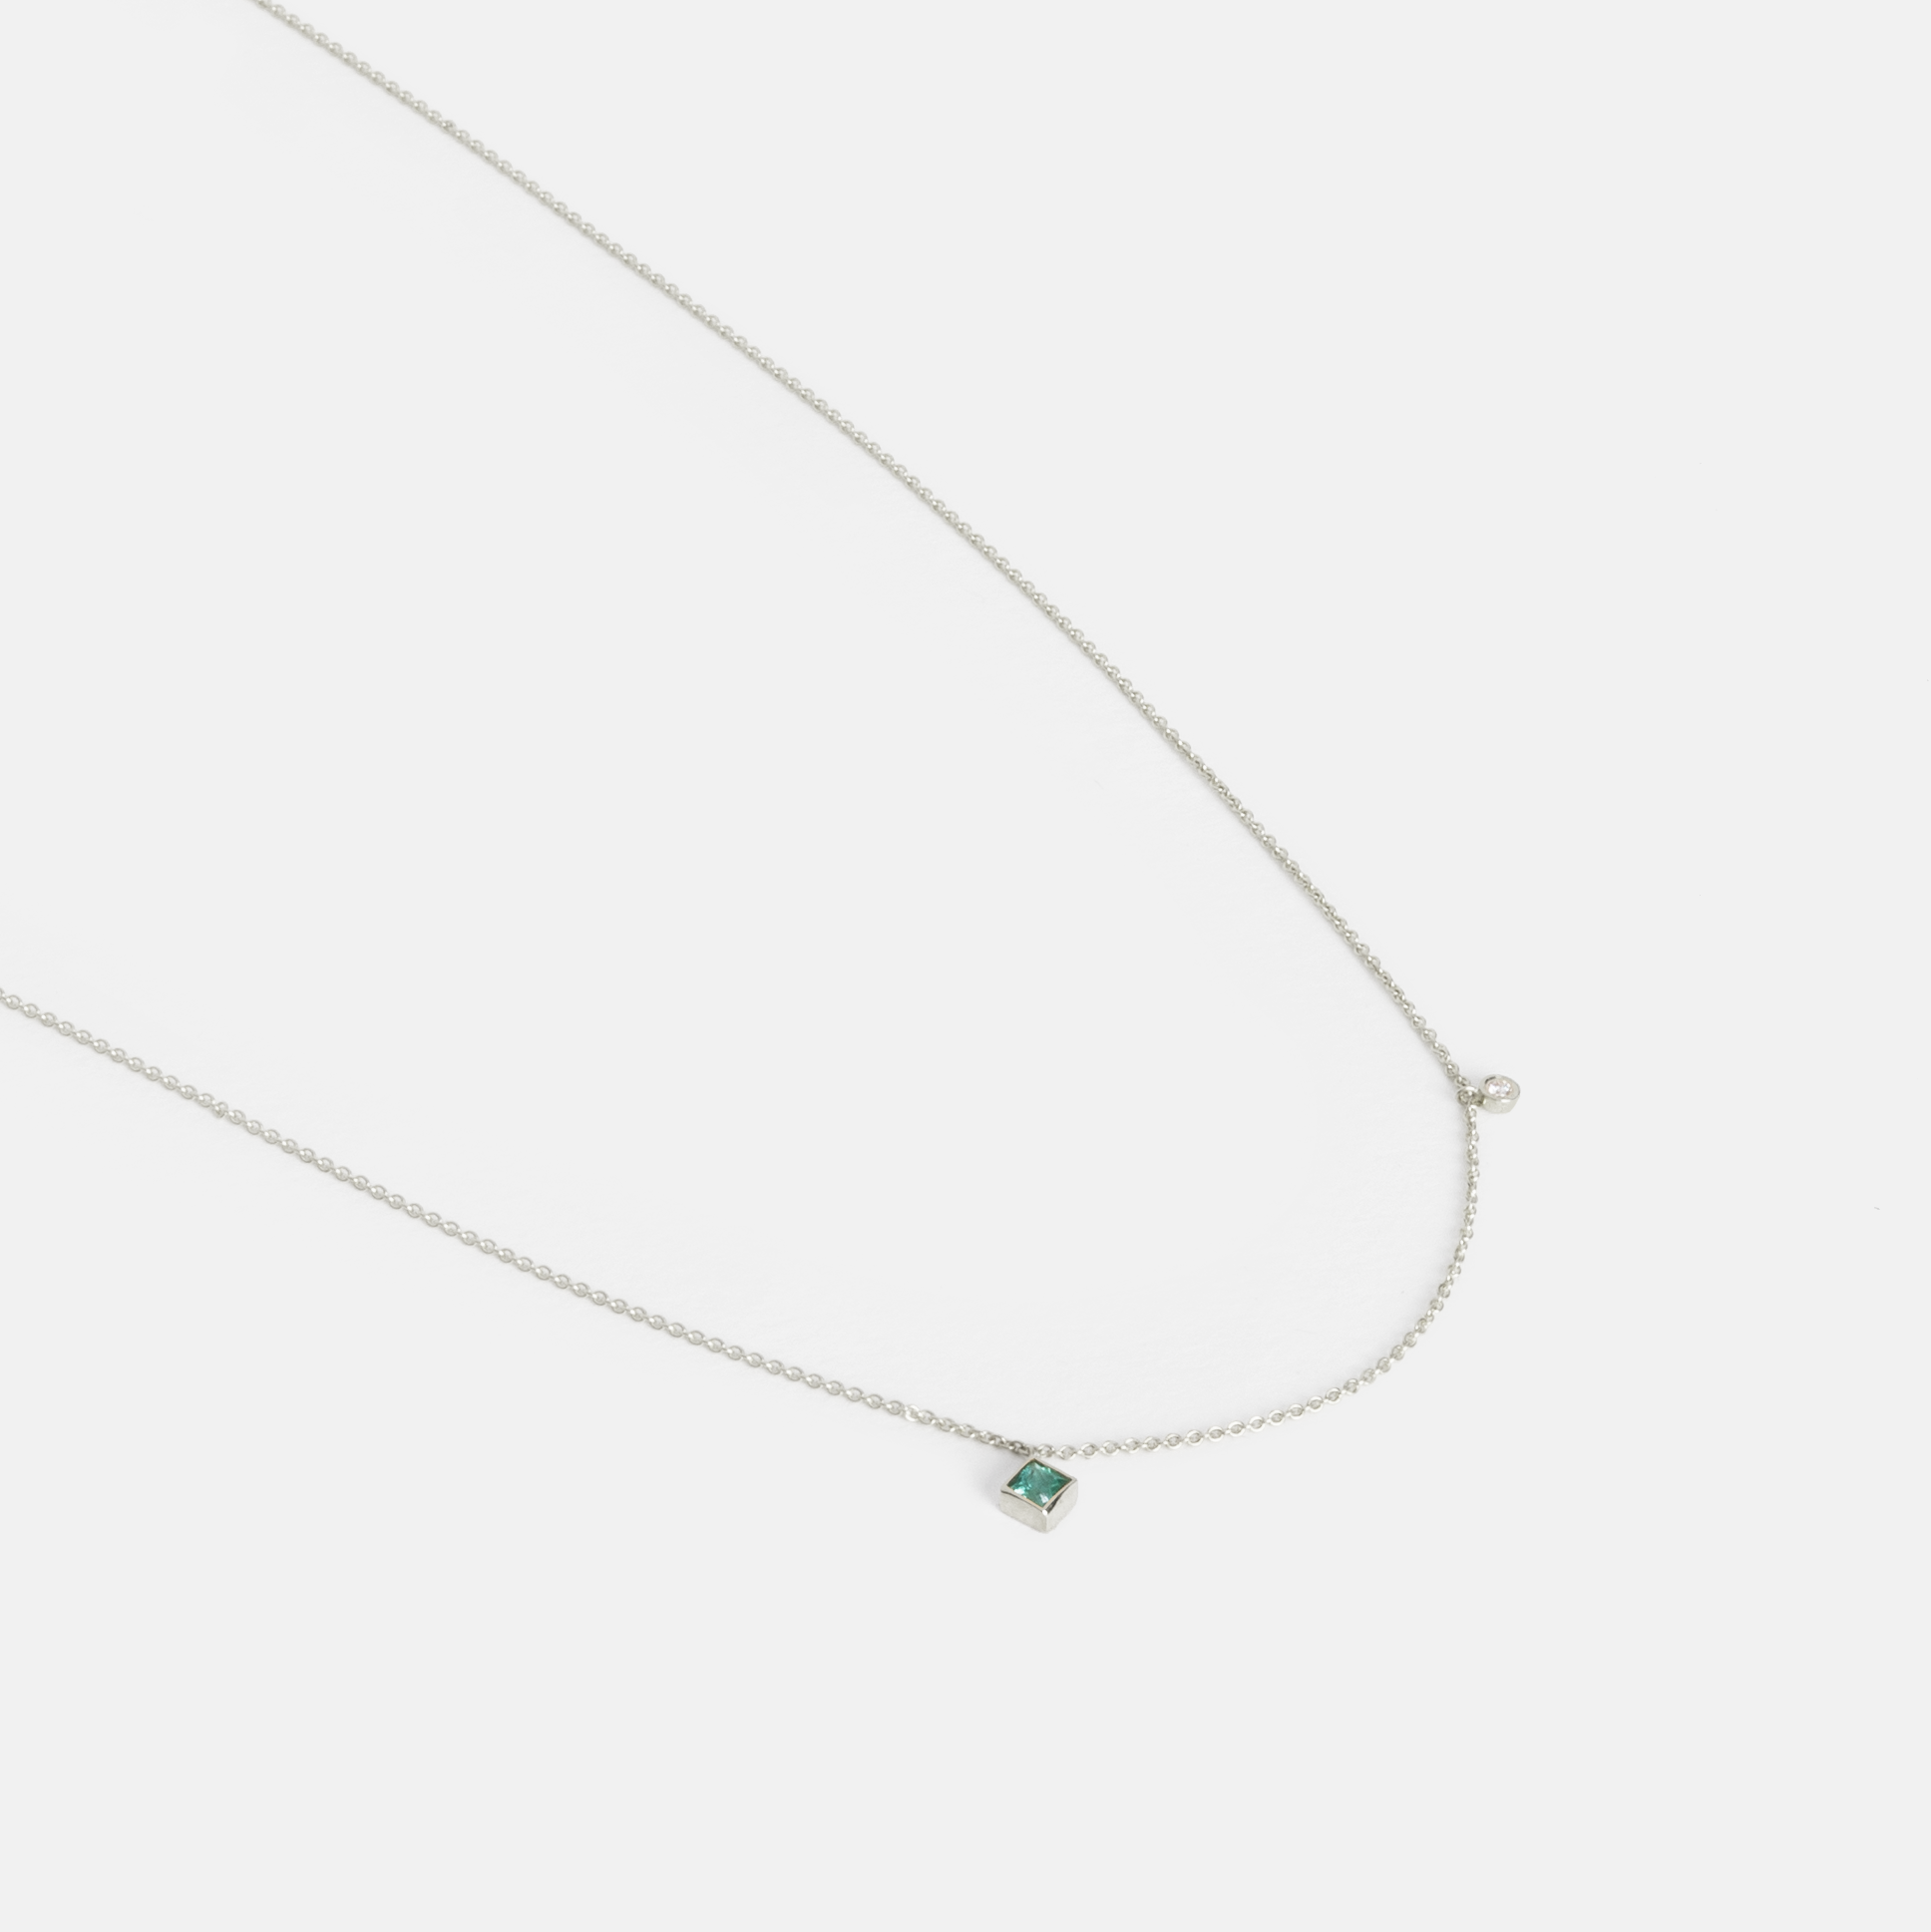 Ibi Thin Necklace in 14k White Gold set with Emerald and White Diamond By SHW Fine Jewelry NYC